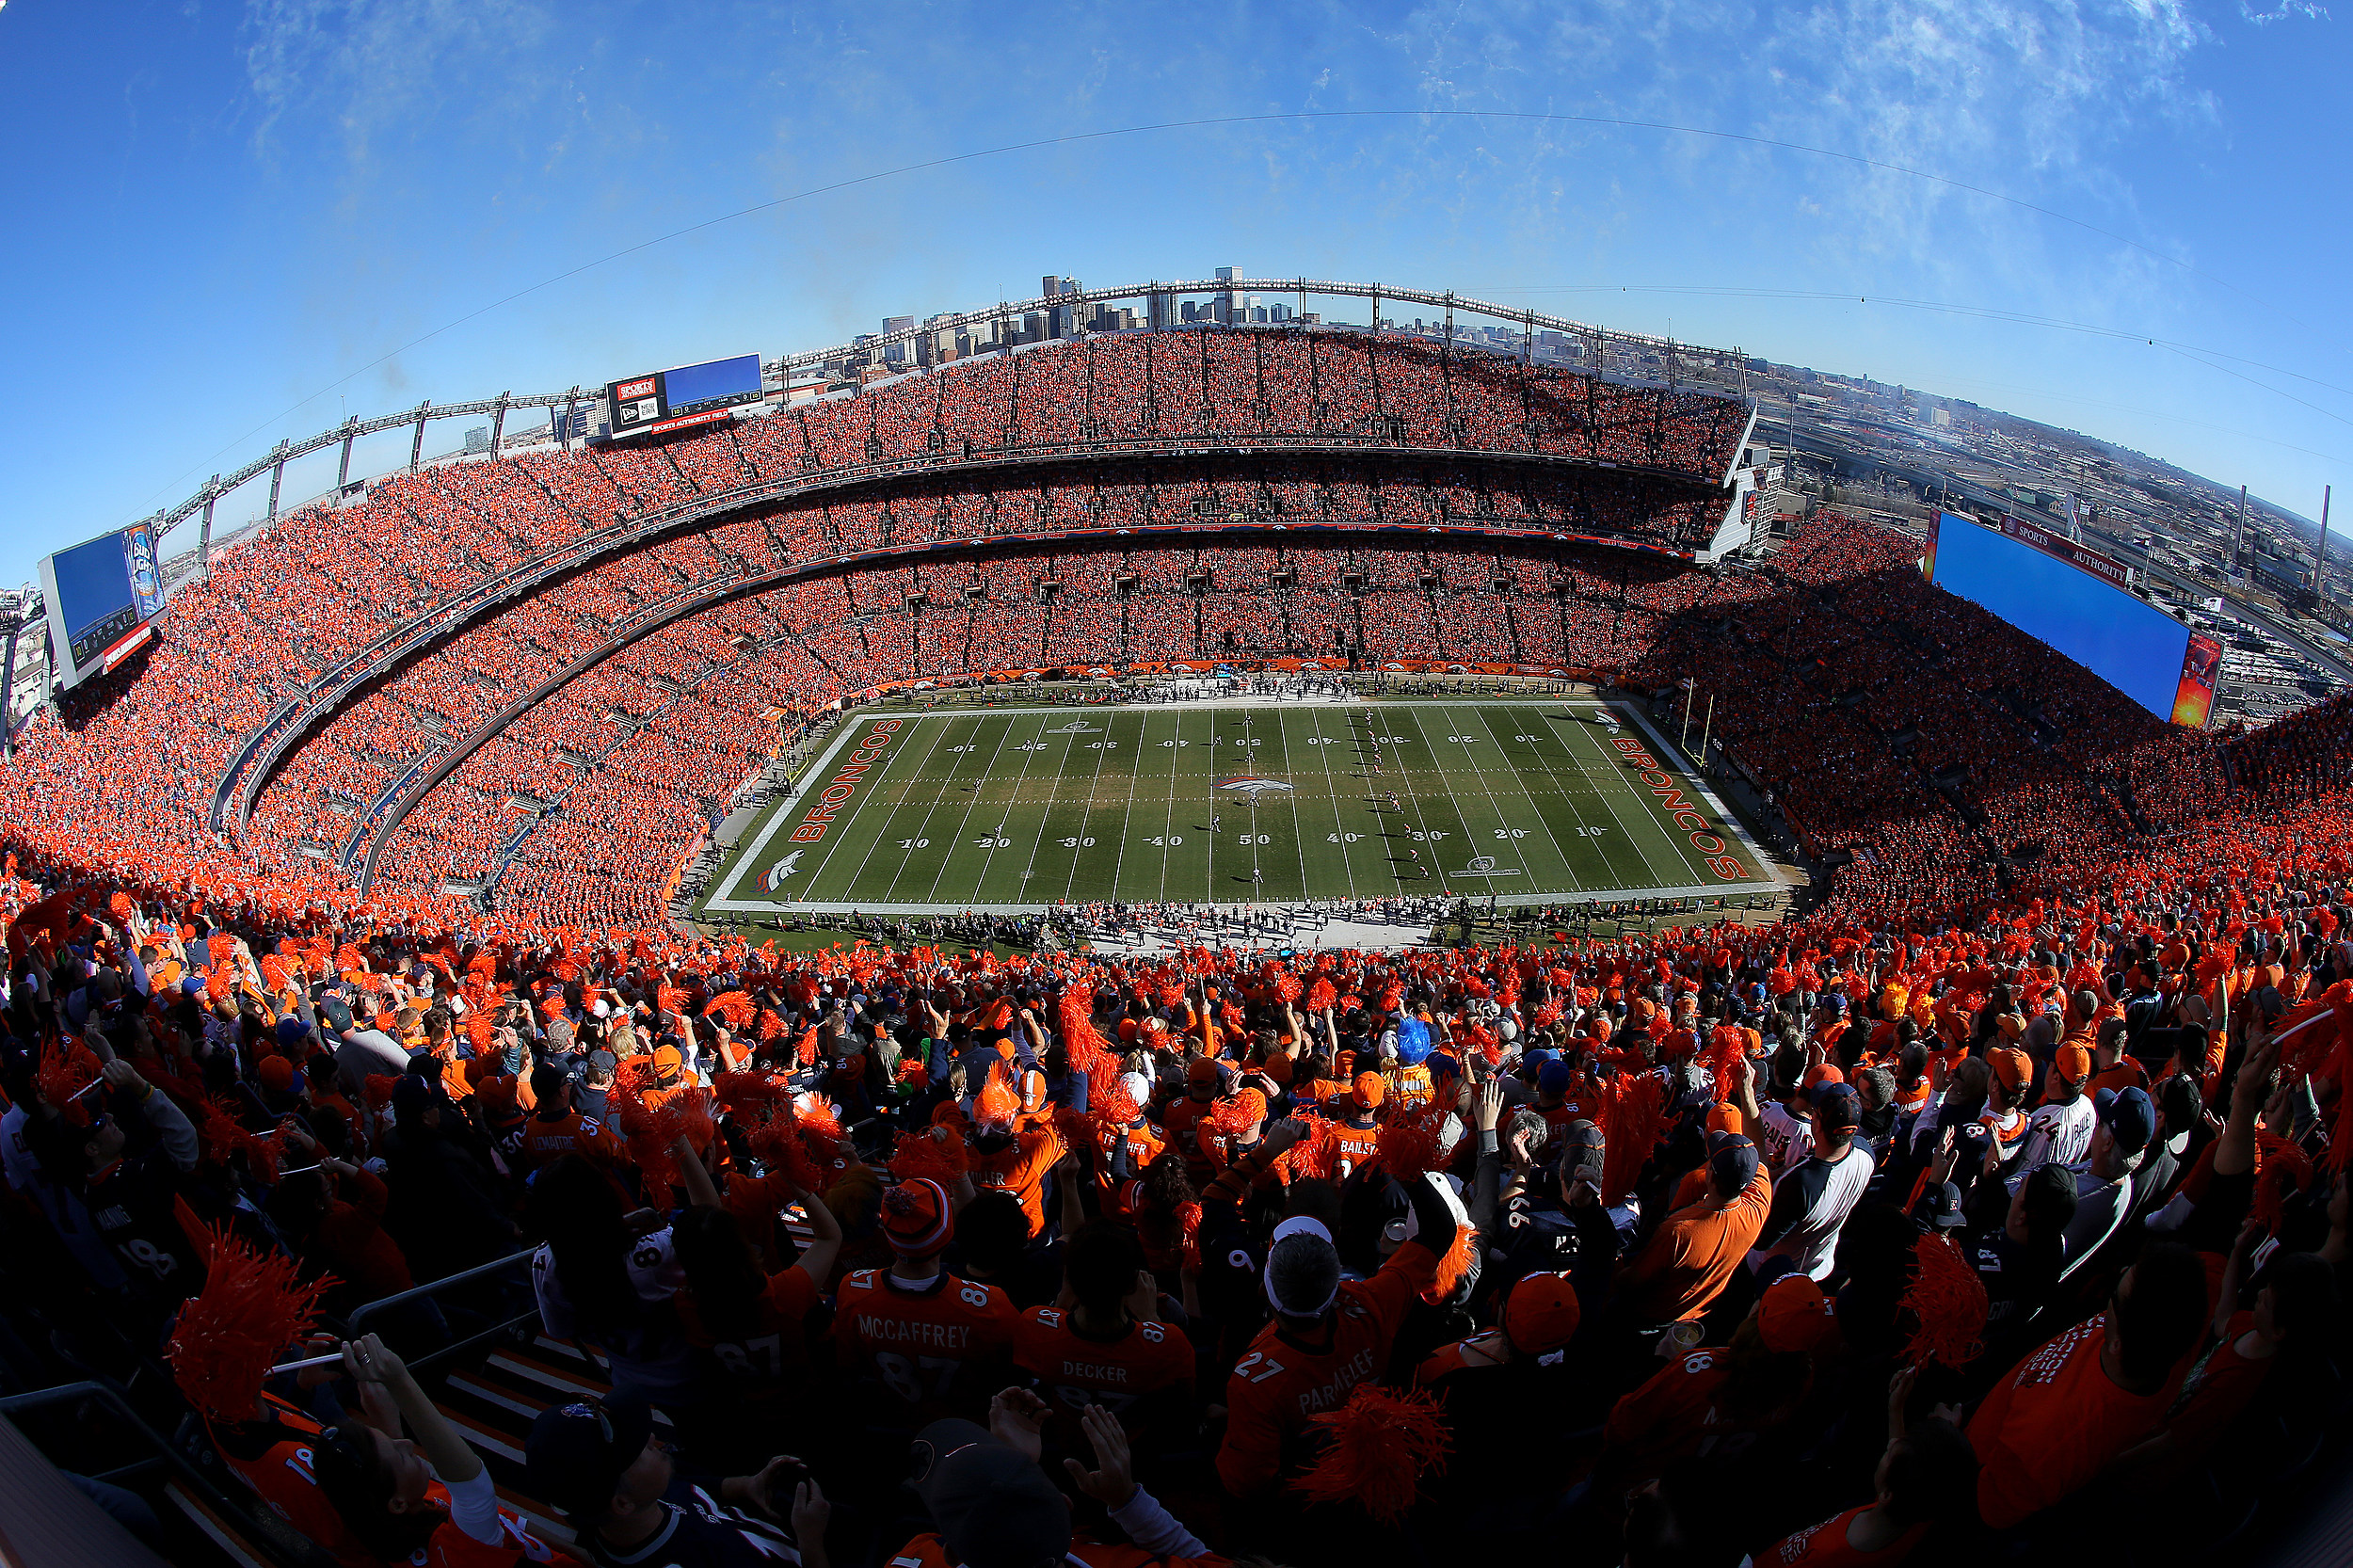 Beer at Denver Broncos Games: Should They Raise or Lower Prices?